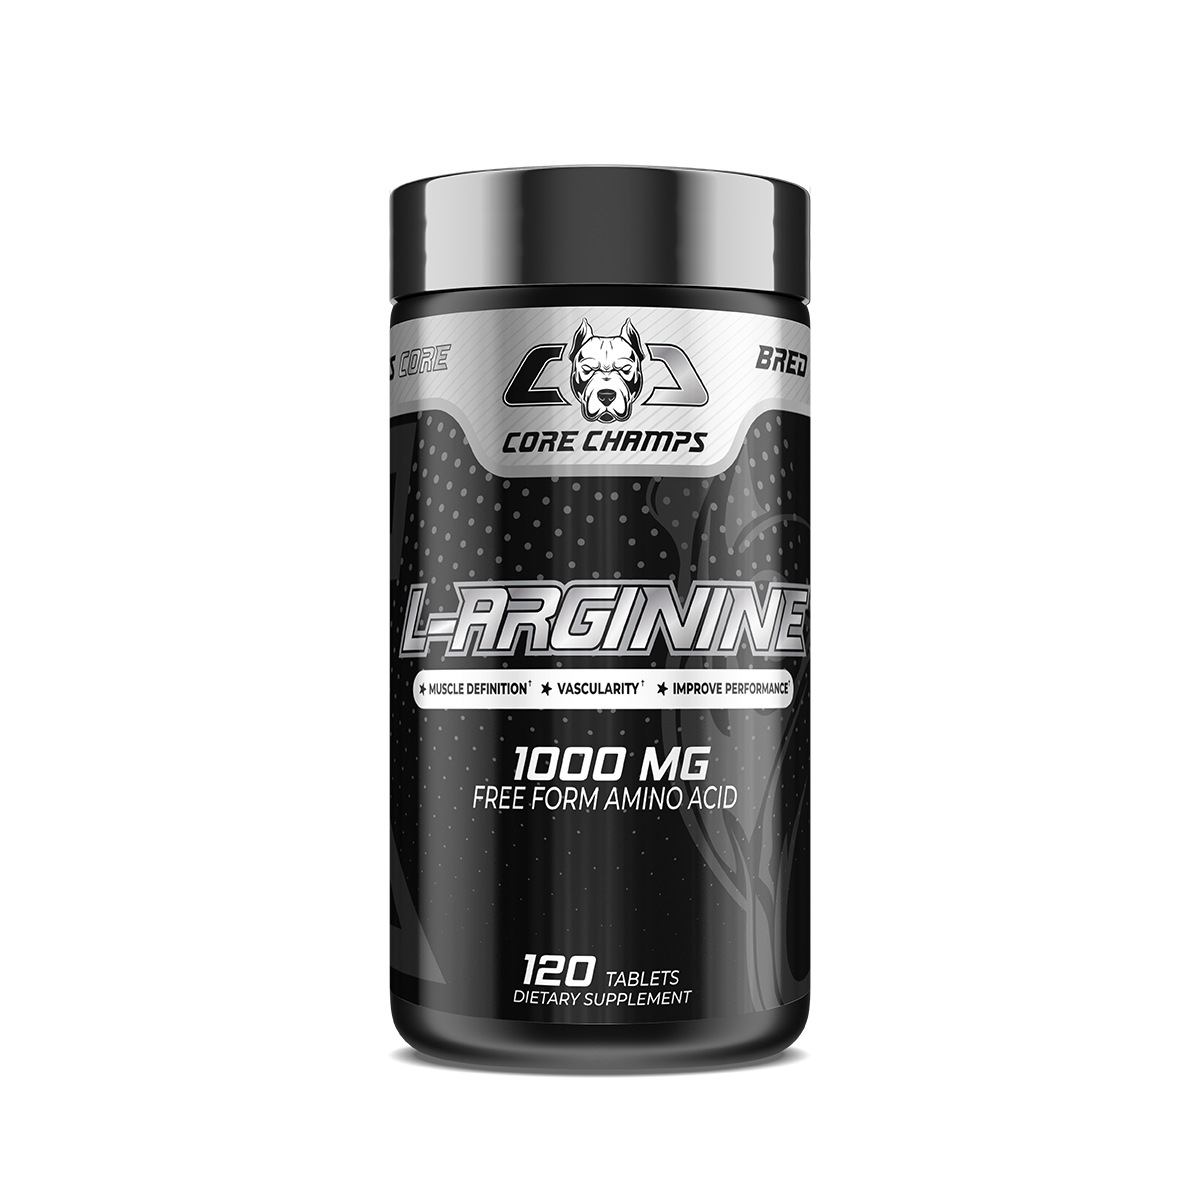 Core Champs L-Arginine 1000mg 120 Tablets Nitric Oxide Booster